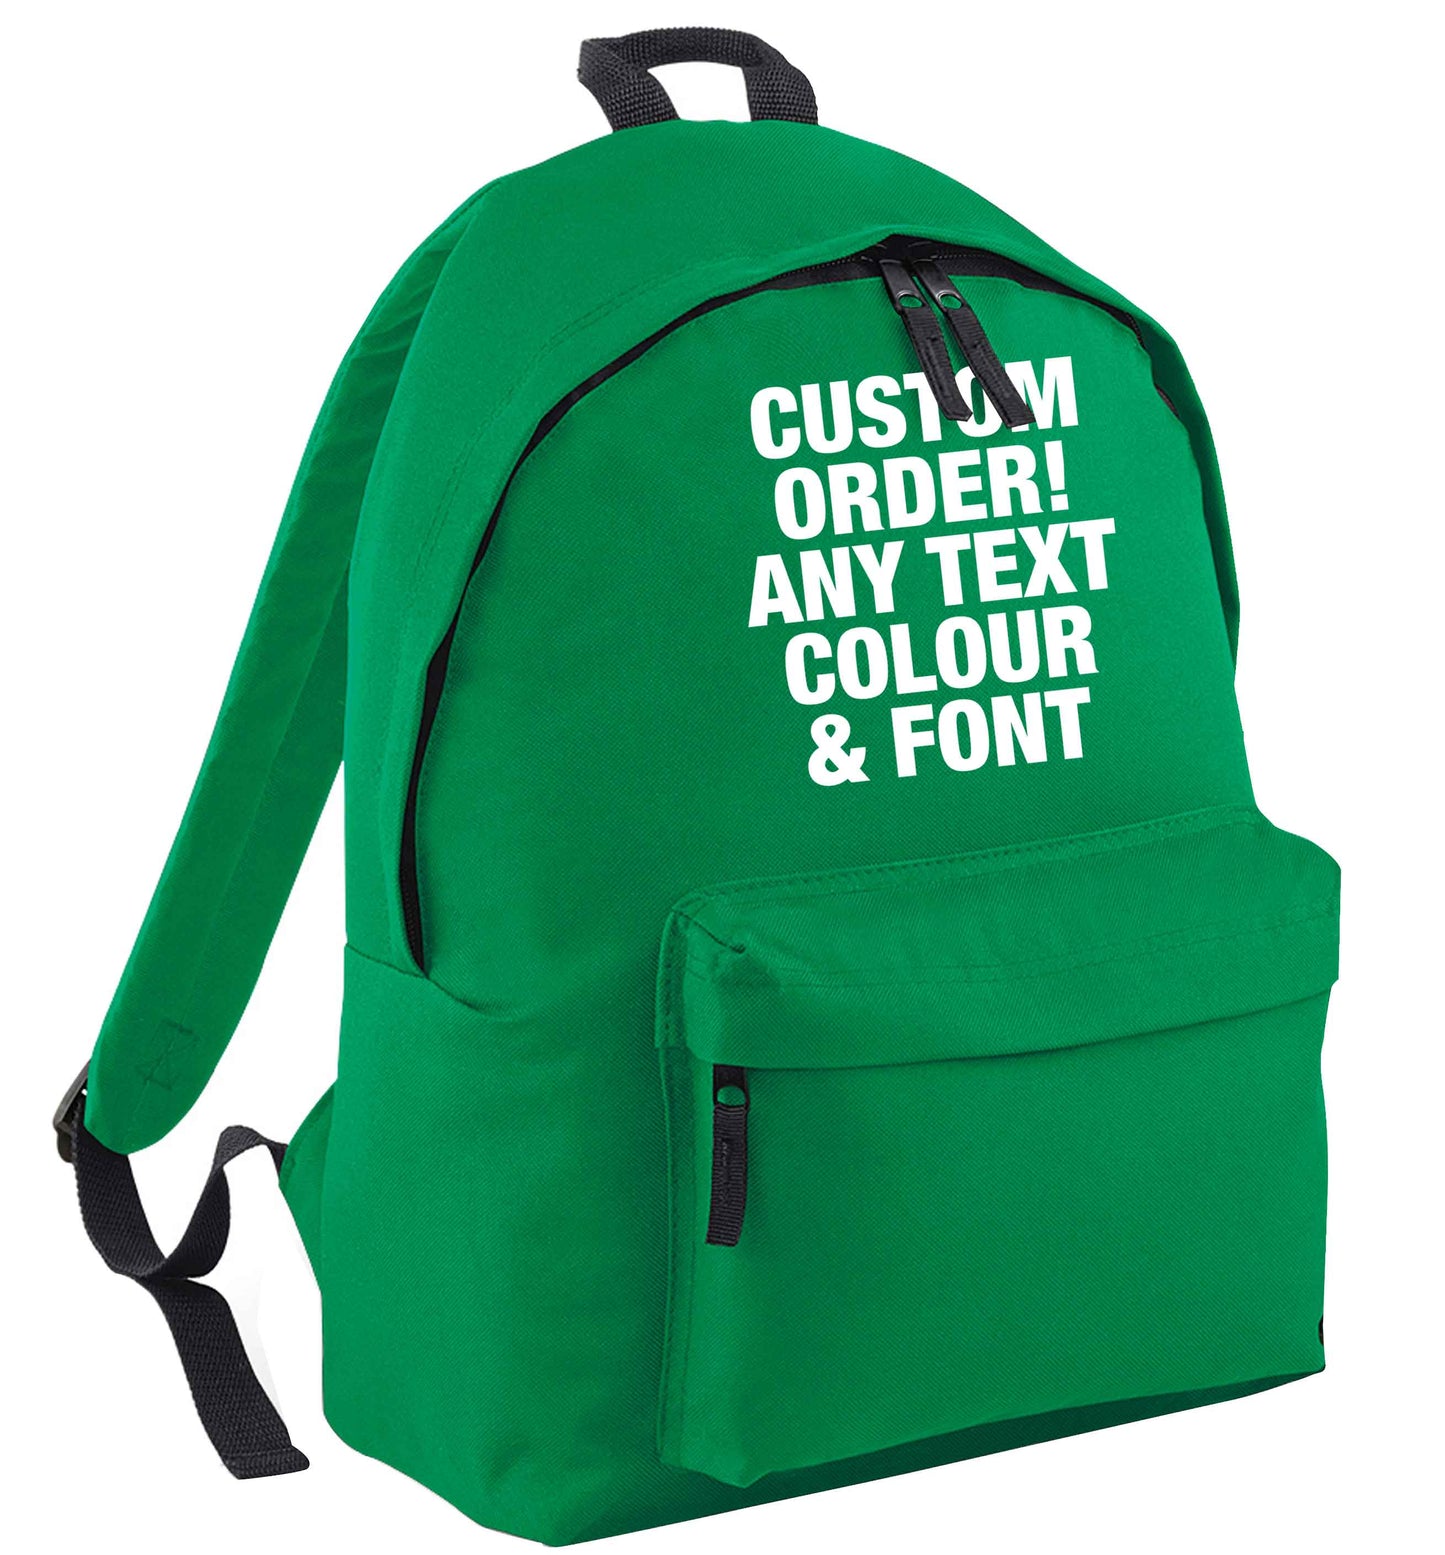 Custom order any text colour and font green adults backpack